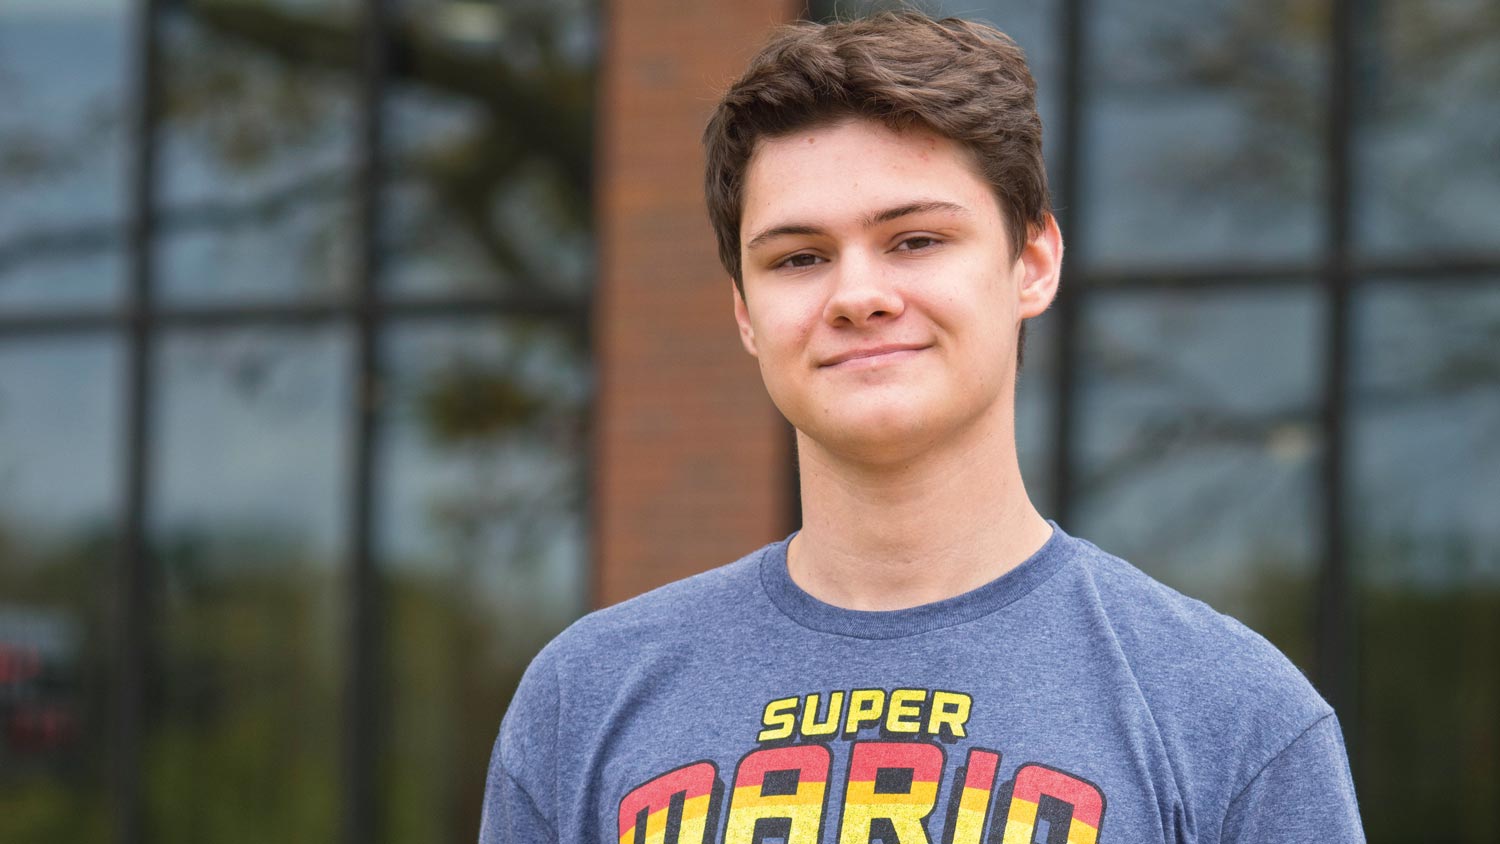 Aaron Sowinski is a marketing intern who completed a co-op at Nintendo.